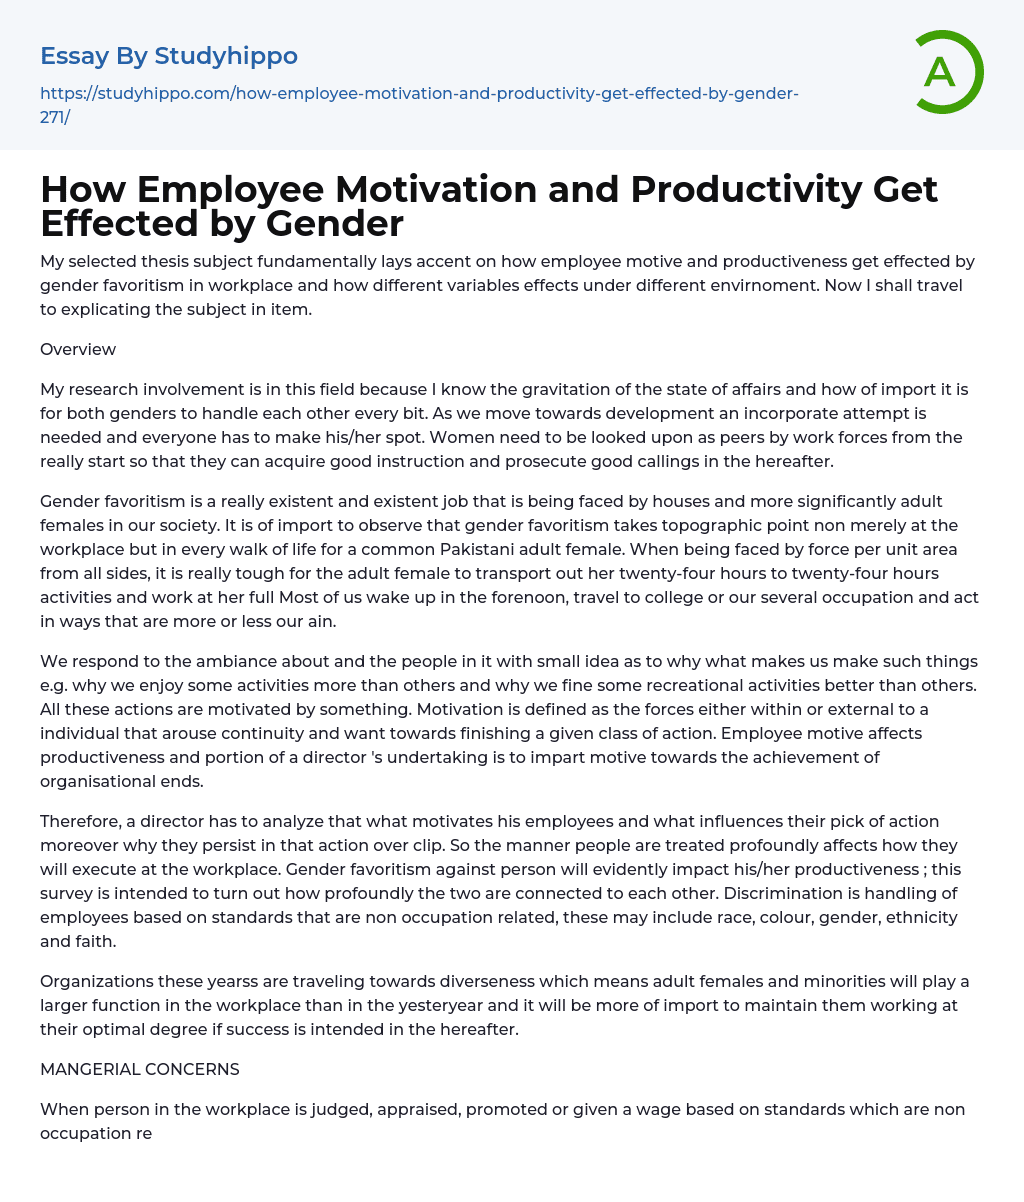 How Employee Motivation and Productivity Get Effected by Gender Essay Example